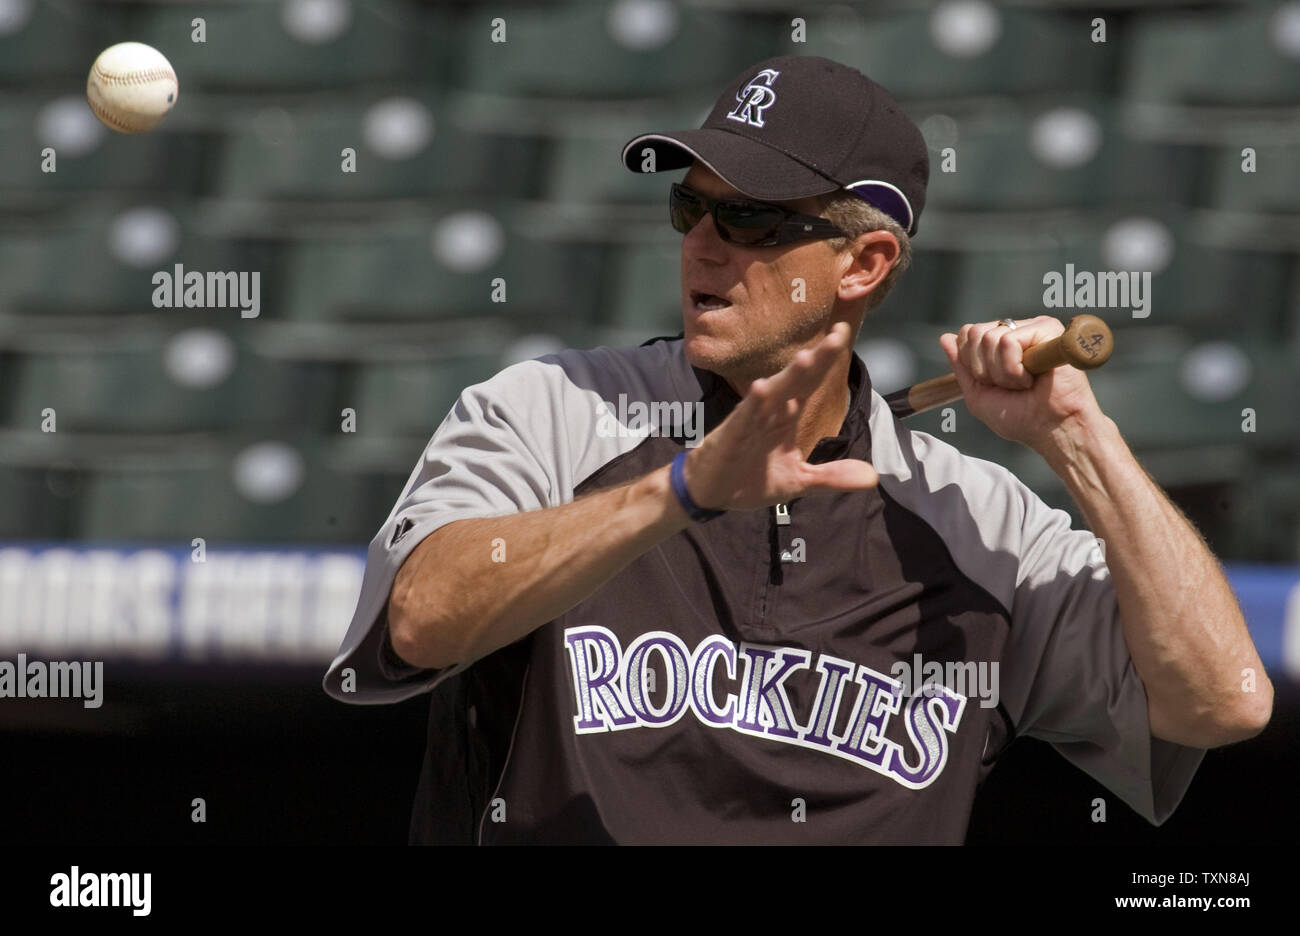 Colorado Rockies manager Jim Tracy hits infield practice at Coors Field in Denver on July 3. 2009.  Tracy has been credited for the recent Rockies winning streaks due to his clubhouse presence and a more relaxed atmosphere.    (UPI Photo/Gary C. Caskey) Stock Photo